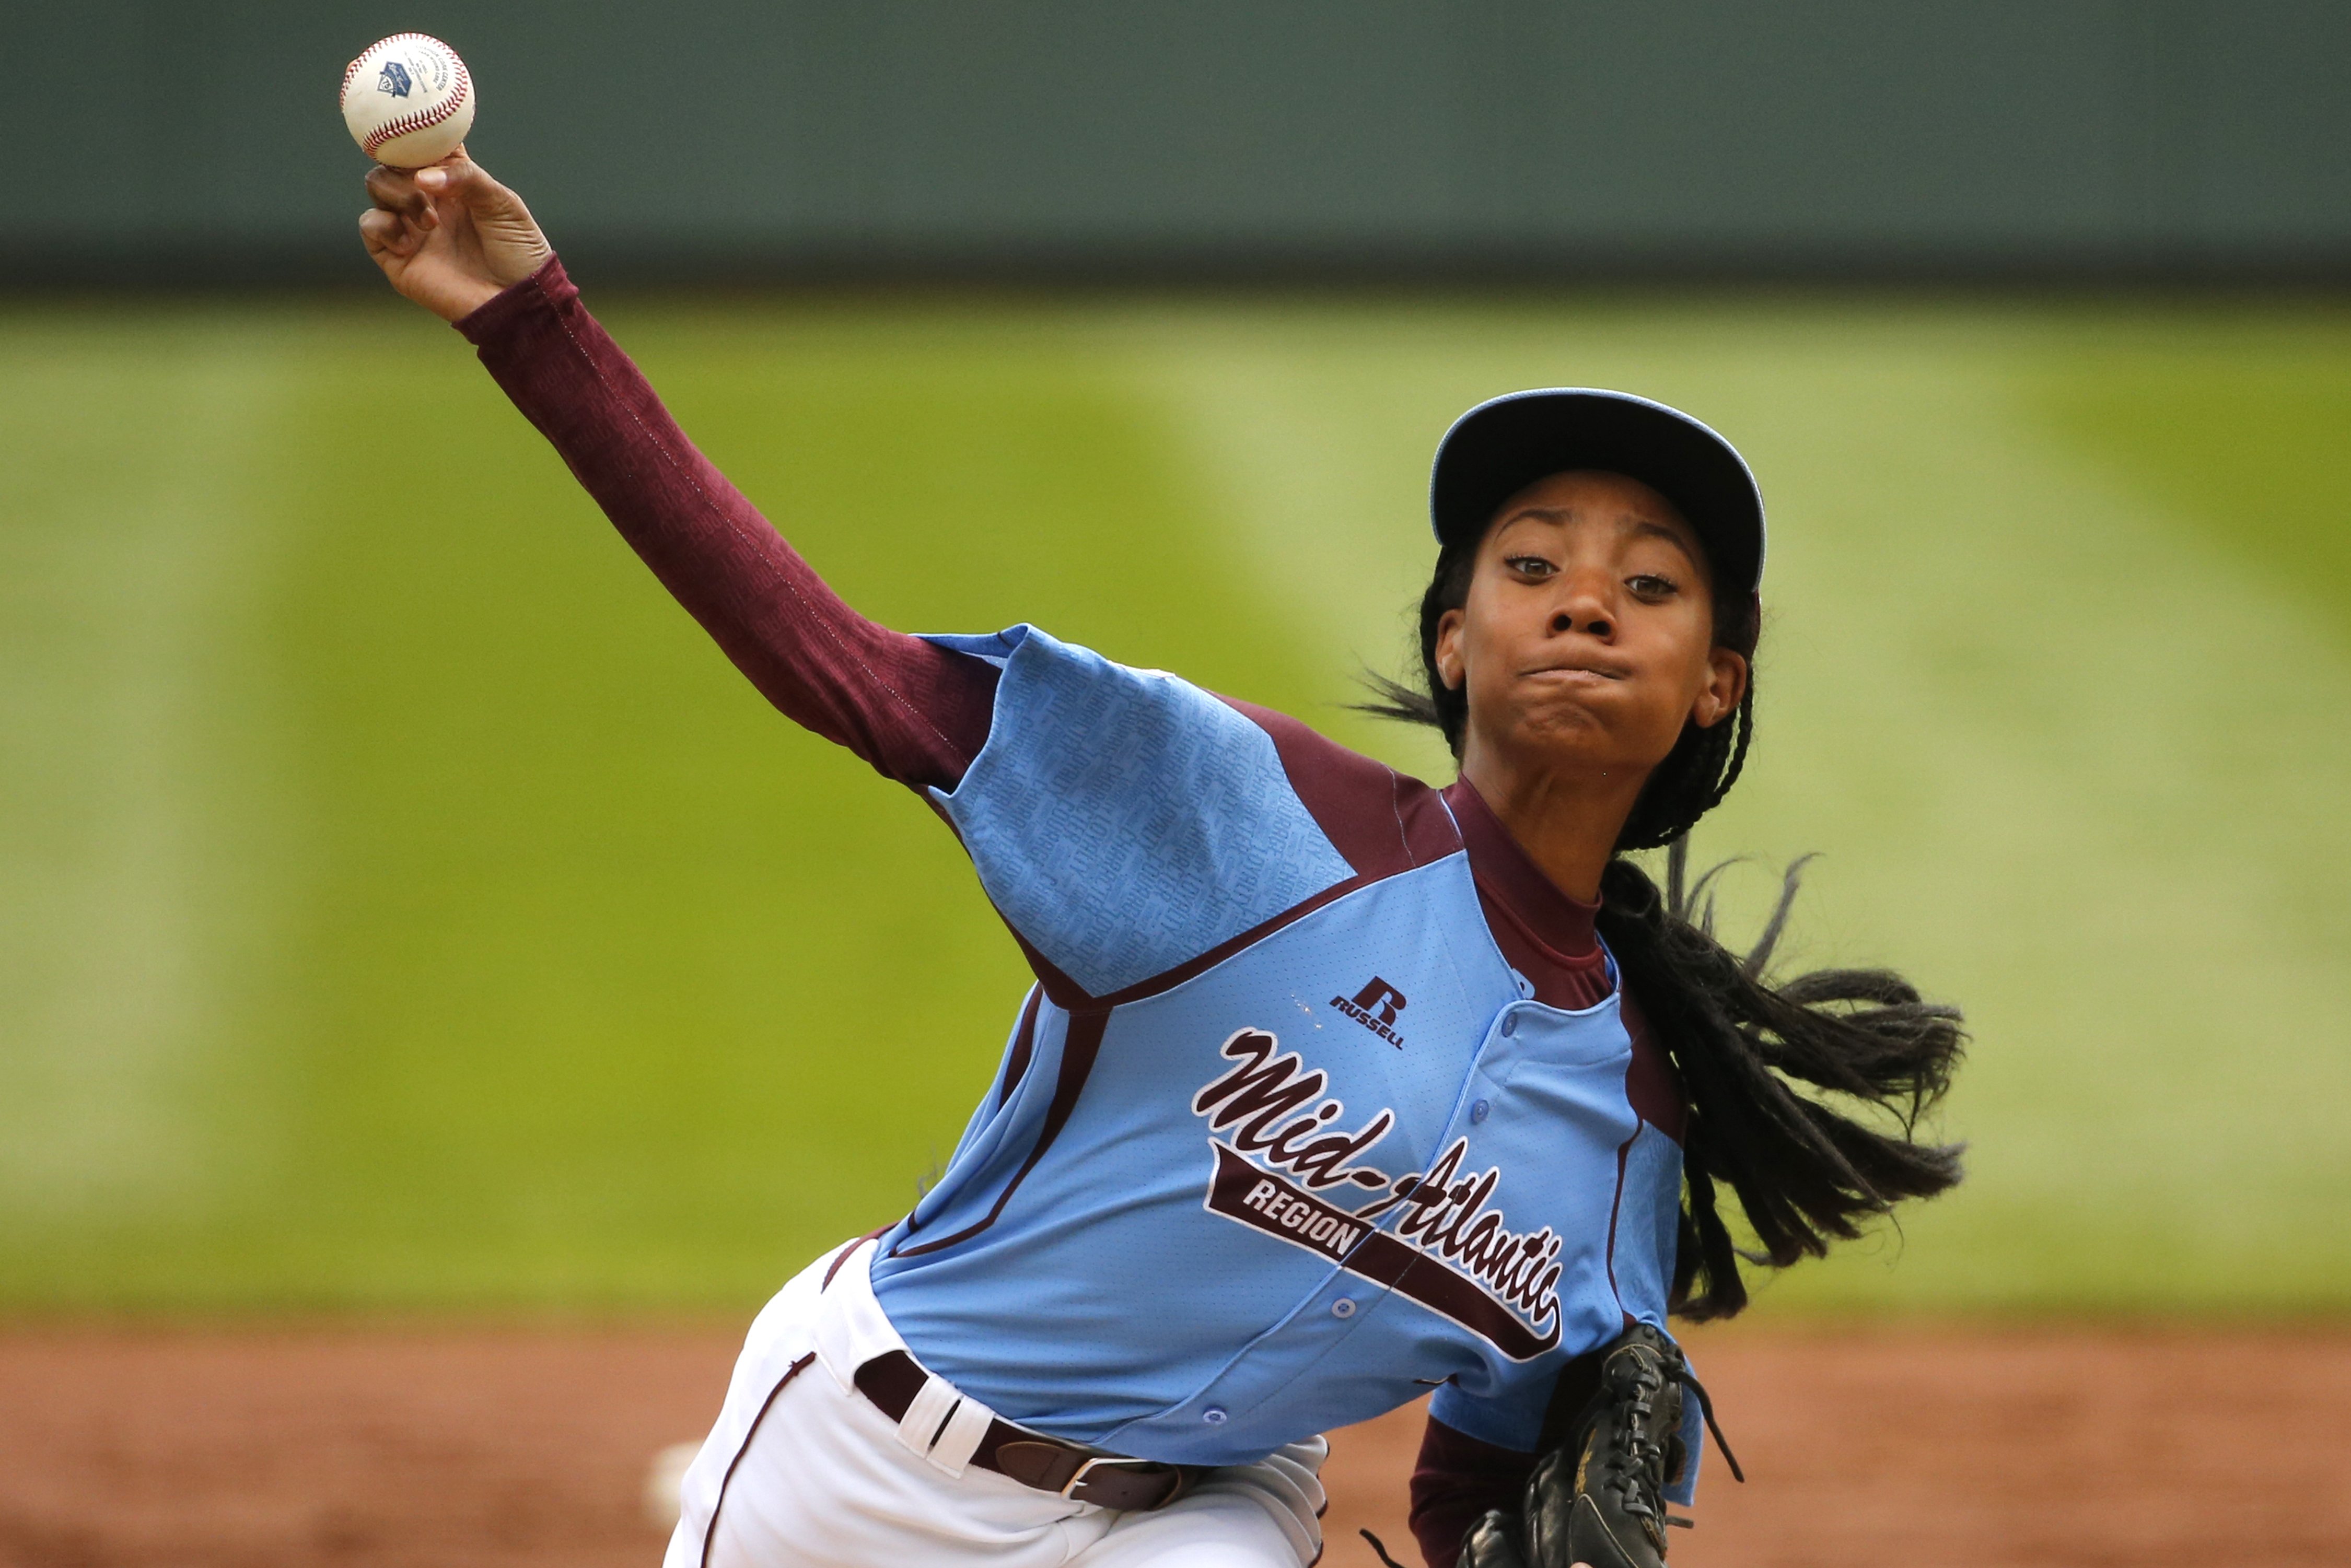 Mo'ne Davis delivers in the first inning against Nashville, Tenn. during a baseball game in United States pool play at the Little League World Series tournament in South Williamsport, Pa., Aug. 15, 2014. (Gene J. Puskar—AP)